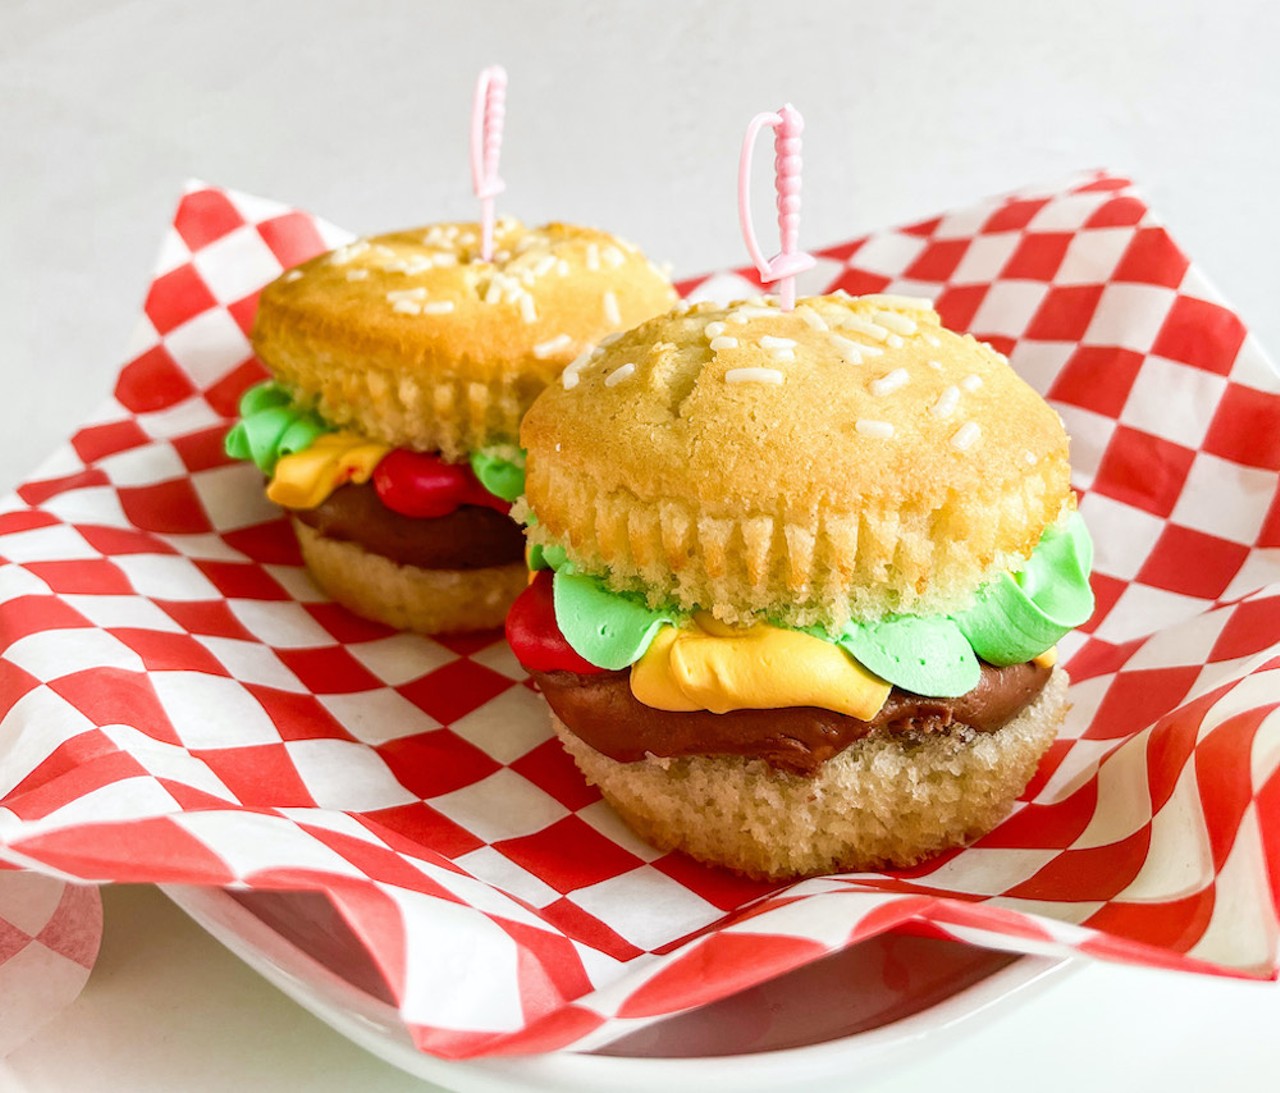 Tres Belle Cakes
8921 Reading Road, Reading
Fully Loaded Cupcake Sliders: A cupcake "bun" filled with burger, lettuce, tomato and cheese all made from their delicious buttercream. Each order contains two Cupcake Sliders.